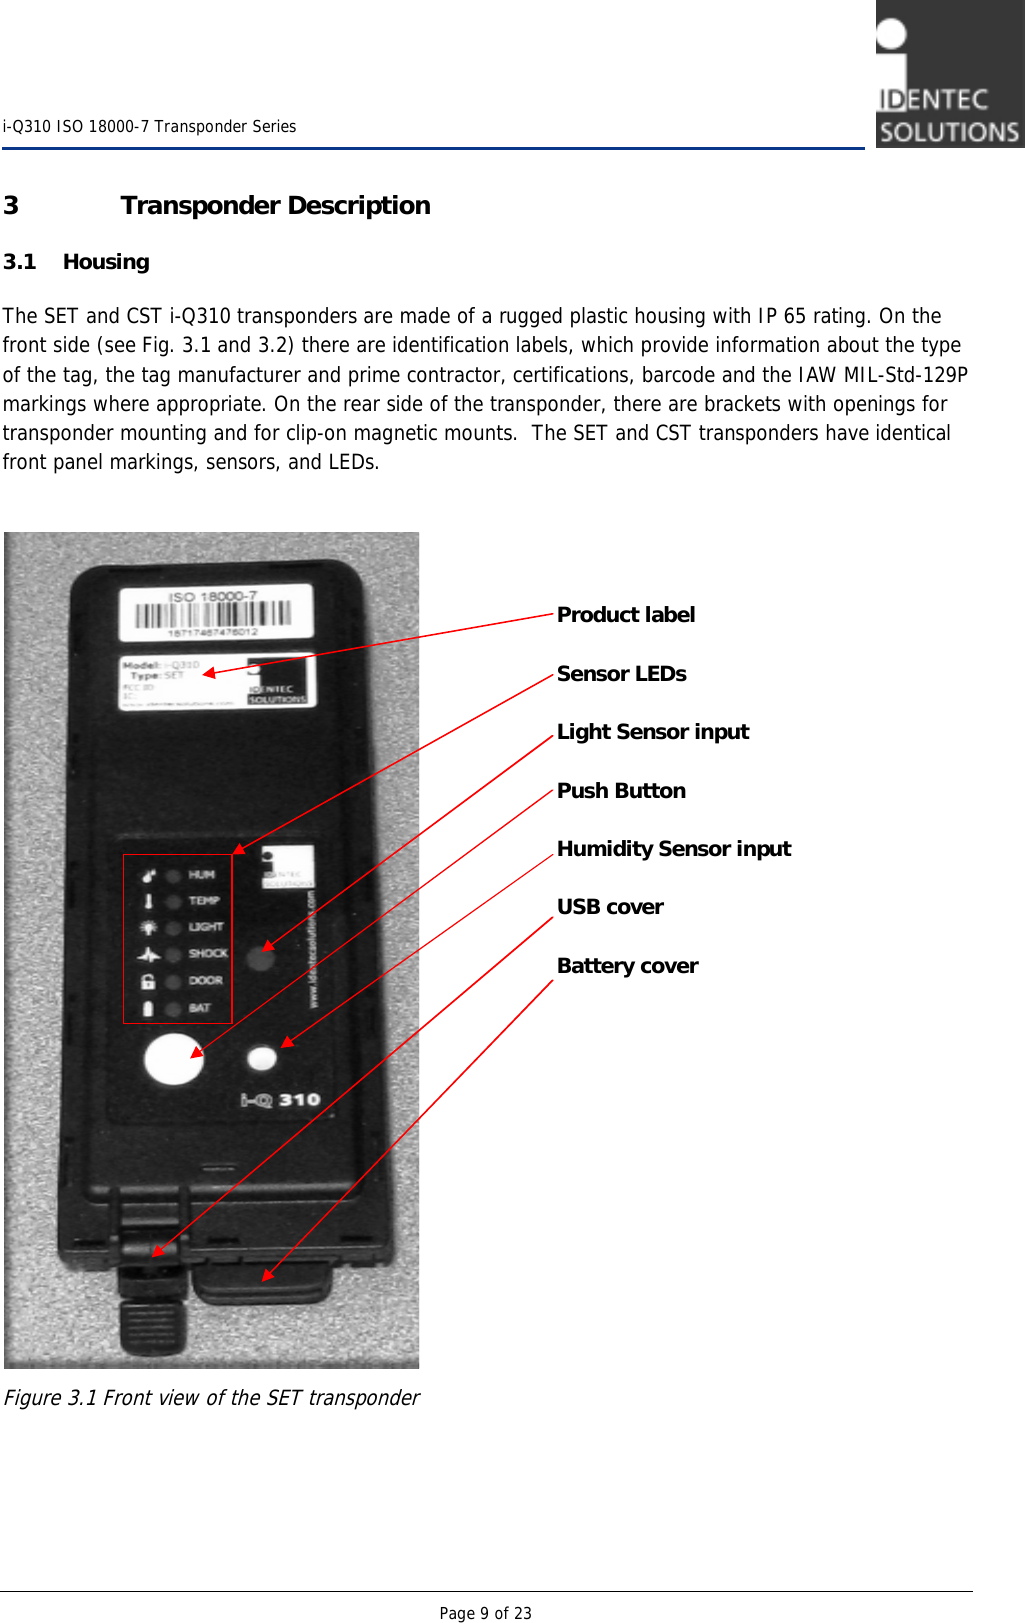    i-Q310 ISO 18000-7 Transponder Series  Page 9 of 23 3 Transponder Description 3.1 Housing The SET and CST i-Q310 transponders are made of a rugged plastic housing with IP 65 rating. On the front side (see Fig. 3.1 and 3.2) there are identification labels, which provide information about the type of the tag, the tag manufacturer and prime contractor, certifications, barcode and the IAW MIL-Std-129P markings where appropriate. On the rear side of the transponder, there are brackets with openings for transponder mounting and for clip-on magnetic mounts.  The SET and CST transponders have identical front panel markings, sensors, and LEDs.     Figure 3.1 Front view of the SET transponder   Product label  Sensor LEDs  Light Sensor input  Push Button  Humidity Sensor input  USB cover  Battery cover 